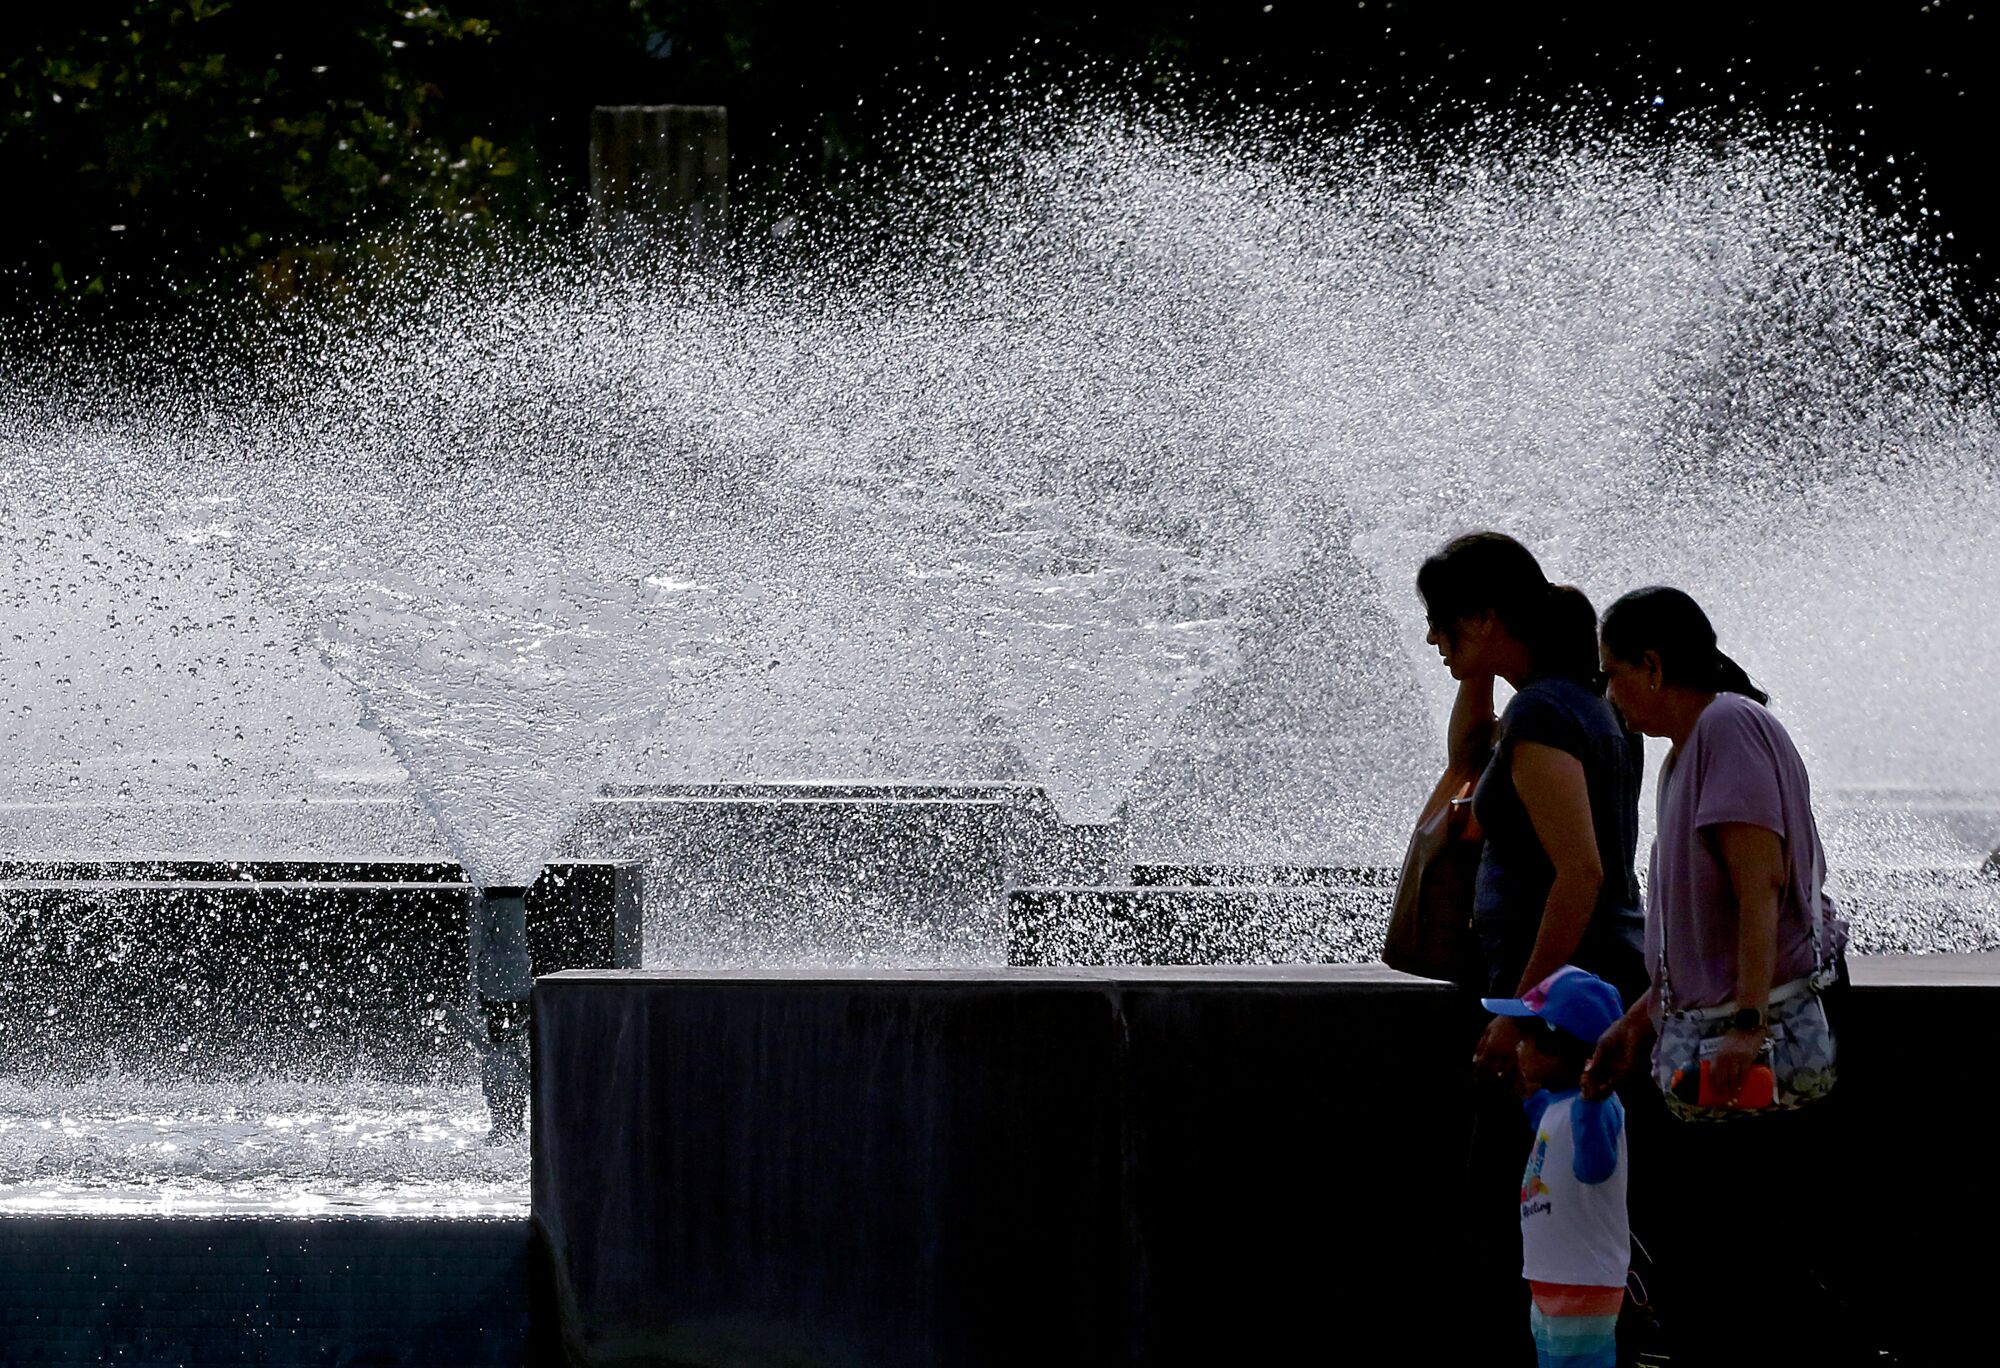 Passersby get some cool mist from a fountain at the Cerritos Civic Center